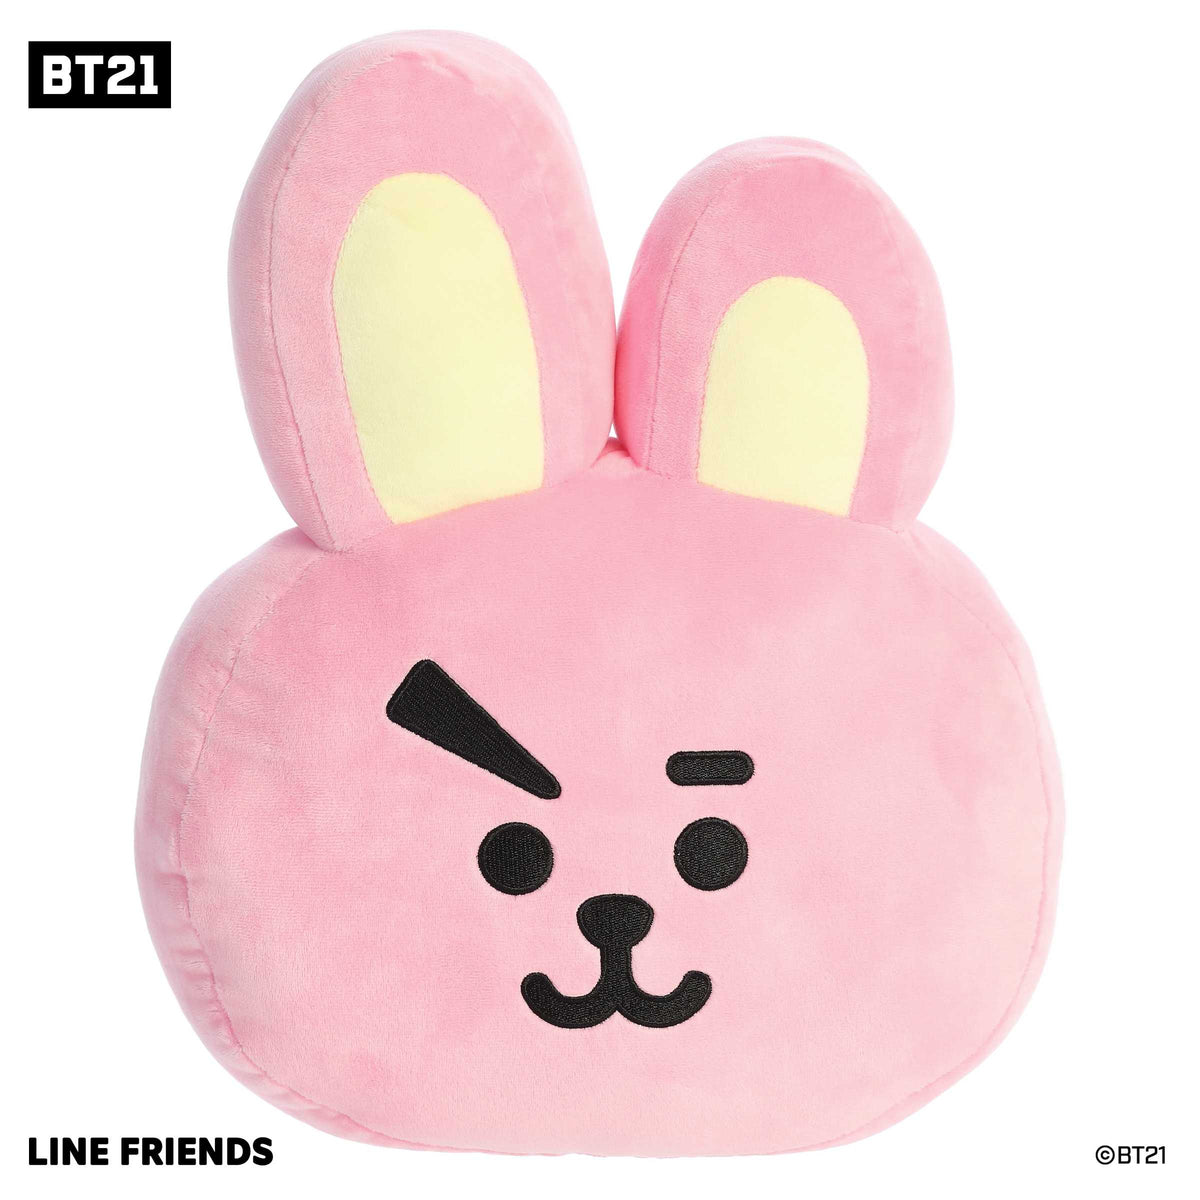 Bright pink COOKY Large Plush by BT21, with cream inner ear accents, showcasing a playful expression